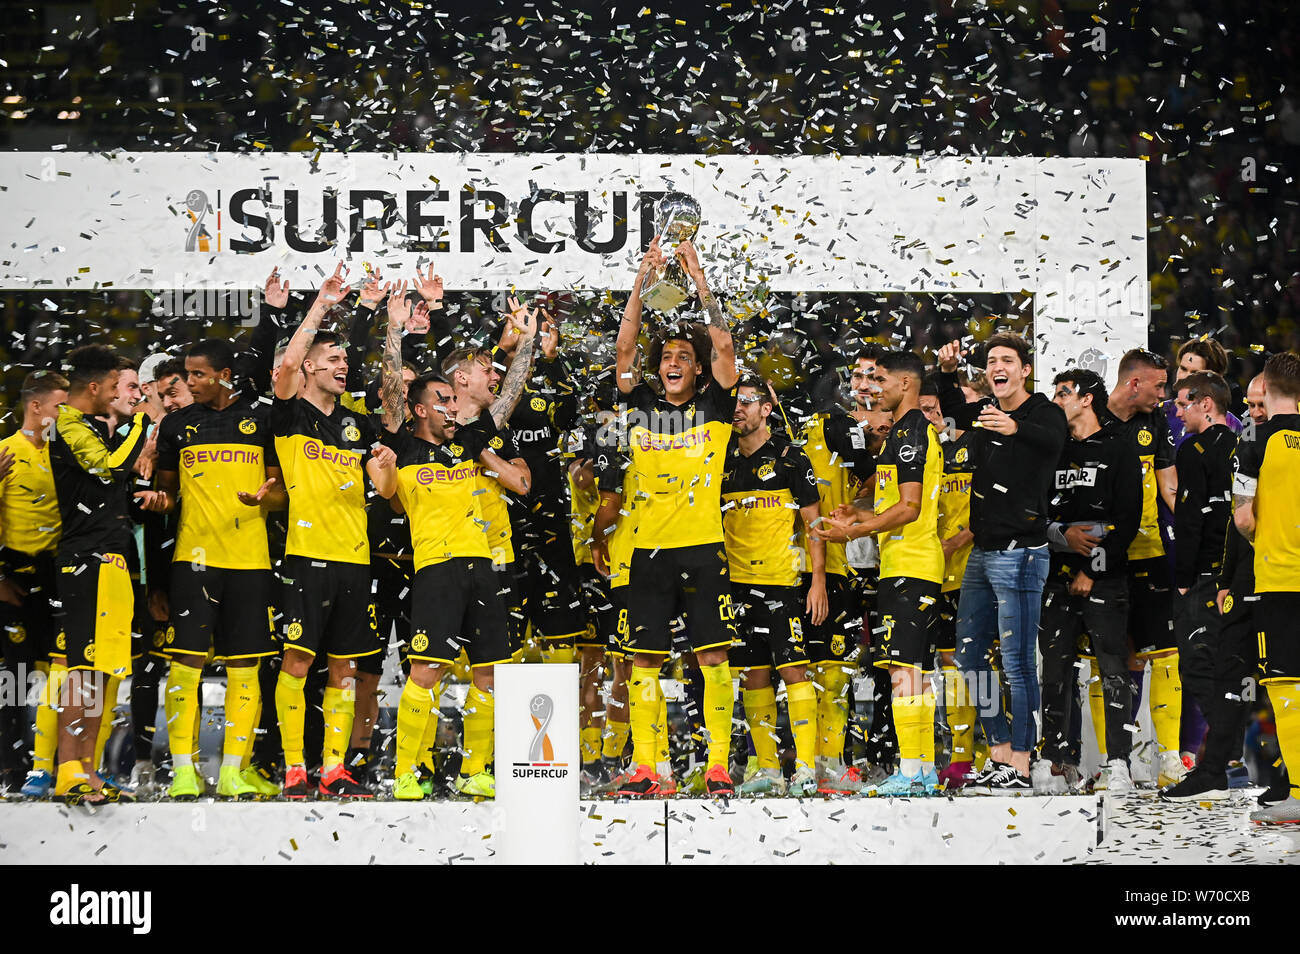 Borussia Dortmund team seen with supercup during the Germany Supercup Final 2019 match between Borussia Dortmund and Bayern Munich.Final score: Borussia Dortmund 2:0 Bayern Munich) Stock Photo